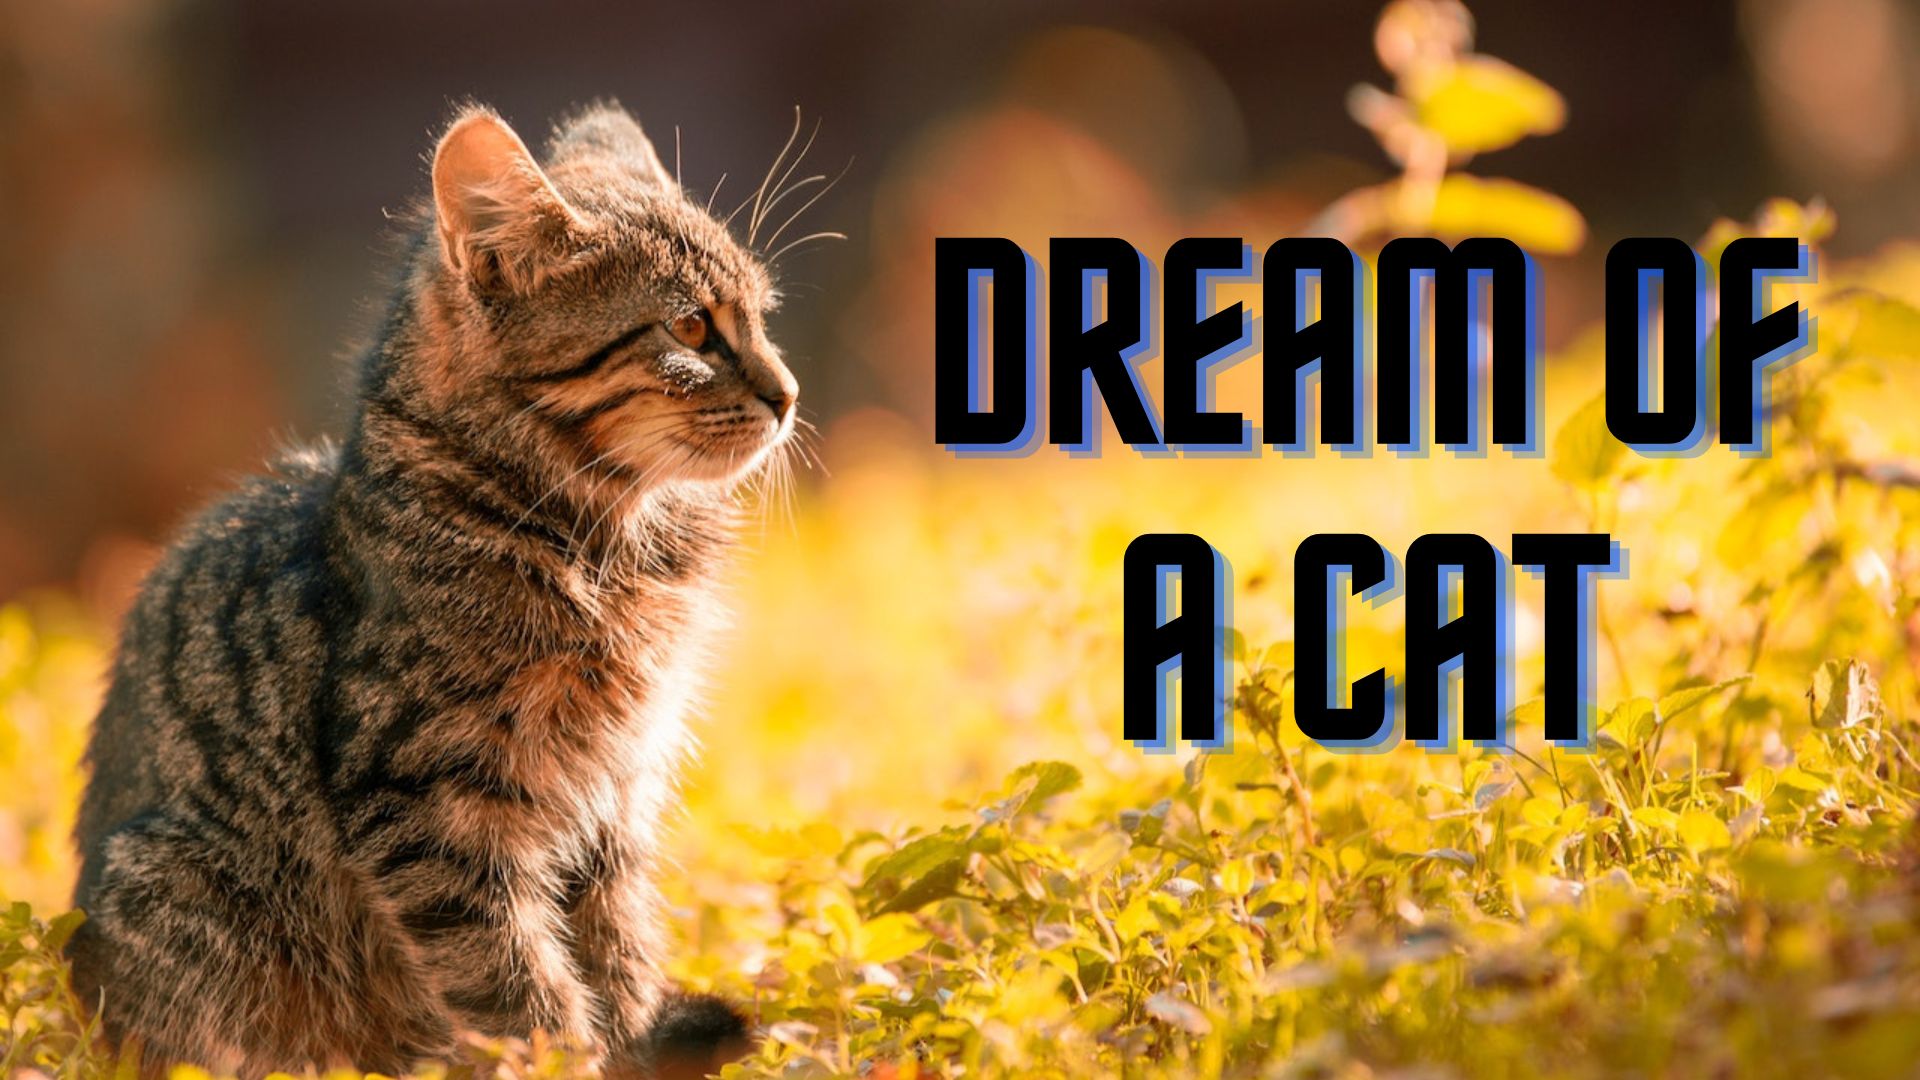 Dream Of A Cat - Independence And Powerful Feminine Energy